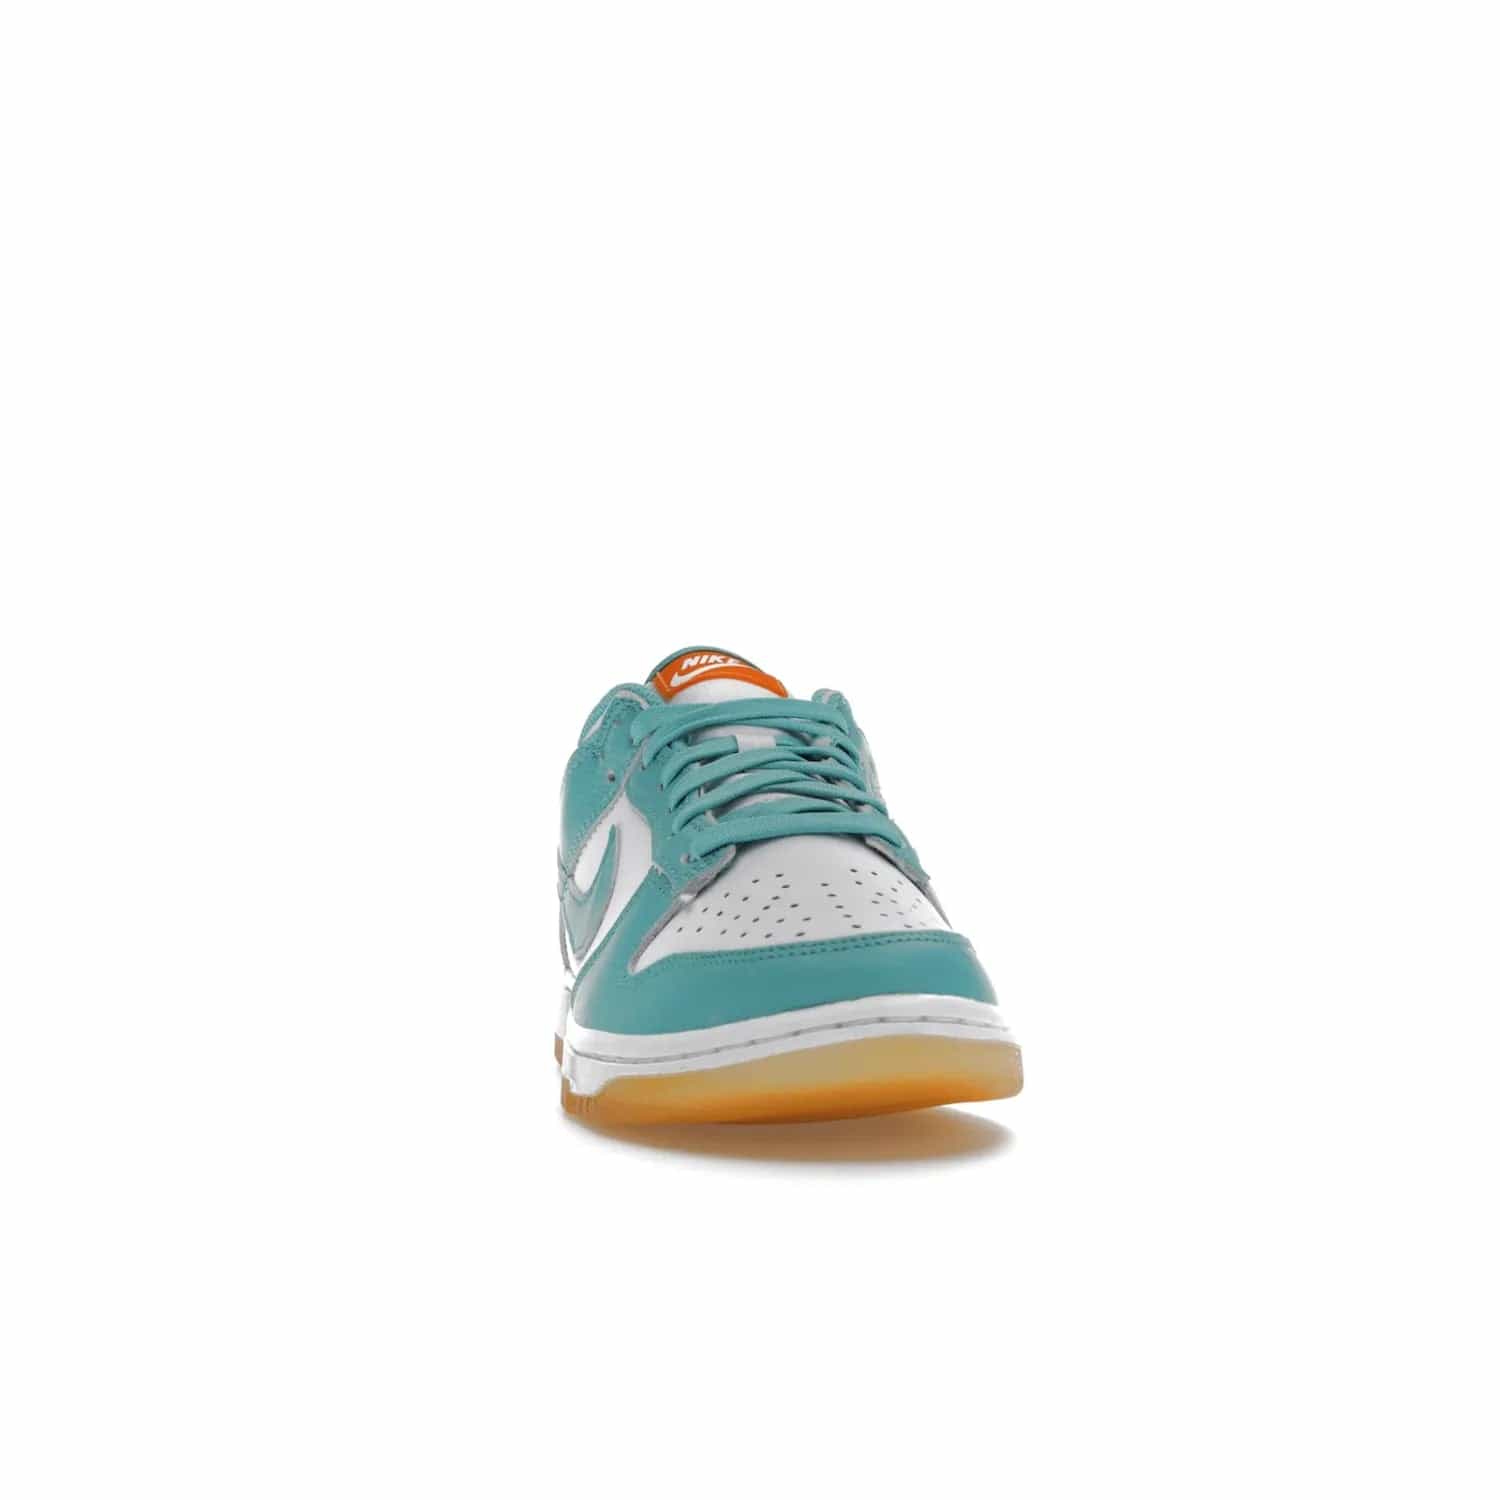 Nike Dunk Low Teal Zeal (Women's) - Image 9 - Only at www.BallersClubKickz.com - A white leather upper with teal overlays and Swooshes, plus yellow and embroidered accents make the Nike Dunk Low Teal Zeal (Women's) the perfect statement piece for any wardrobe.